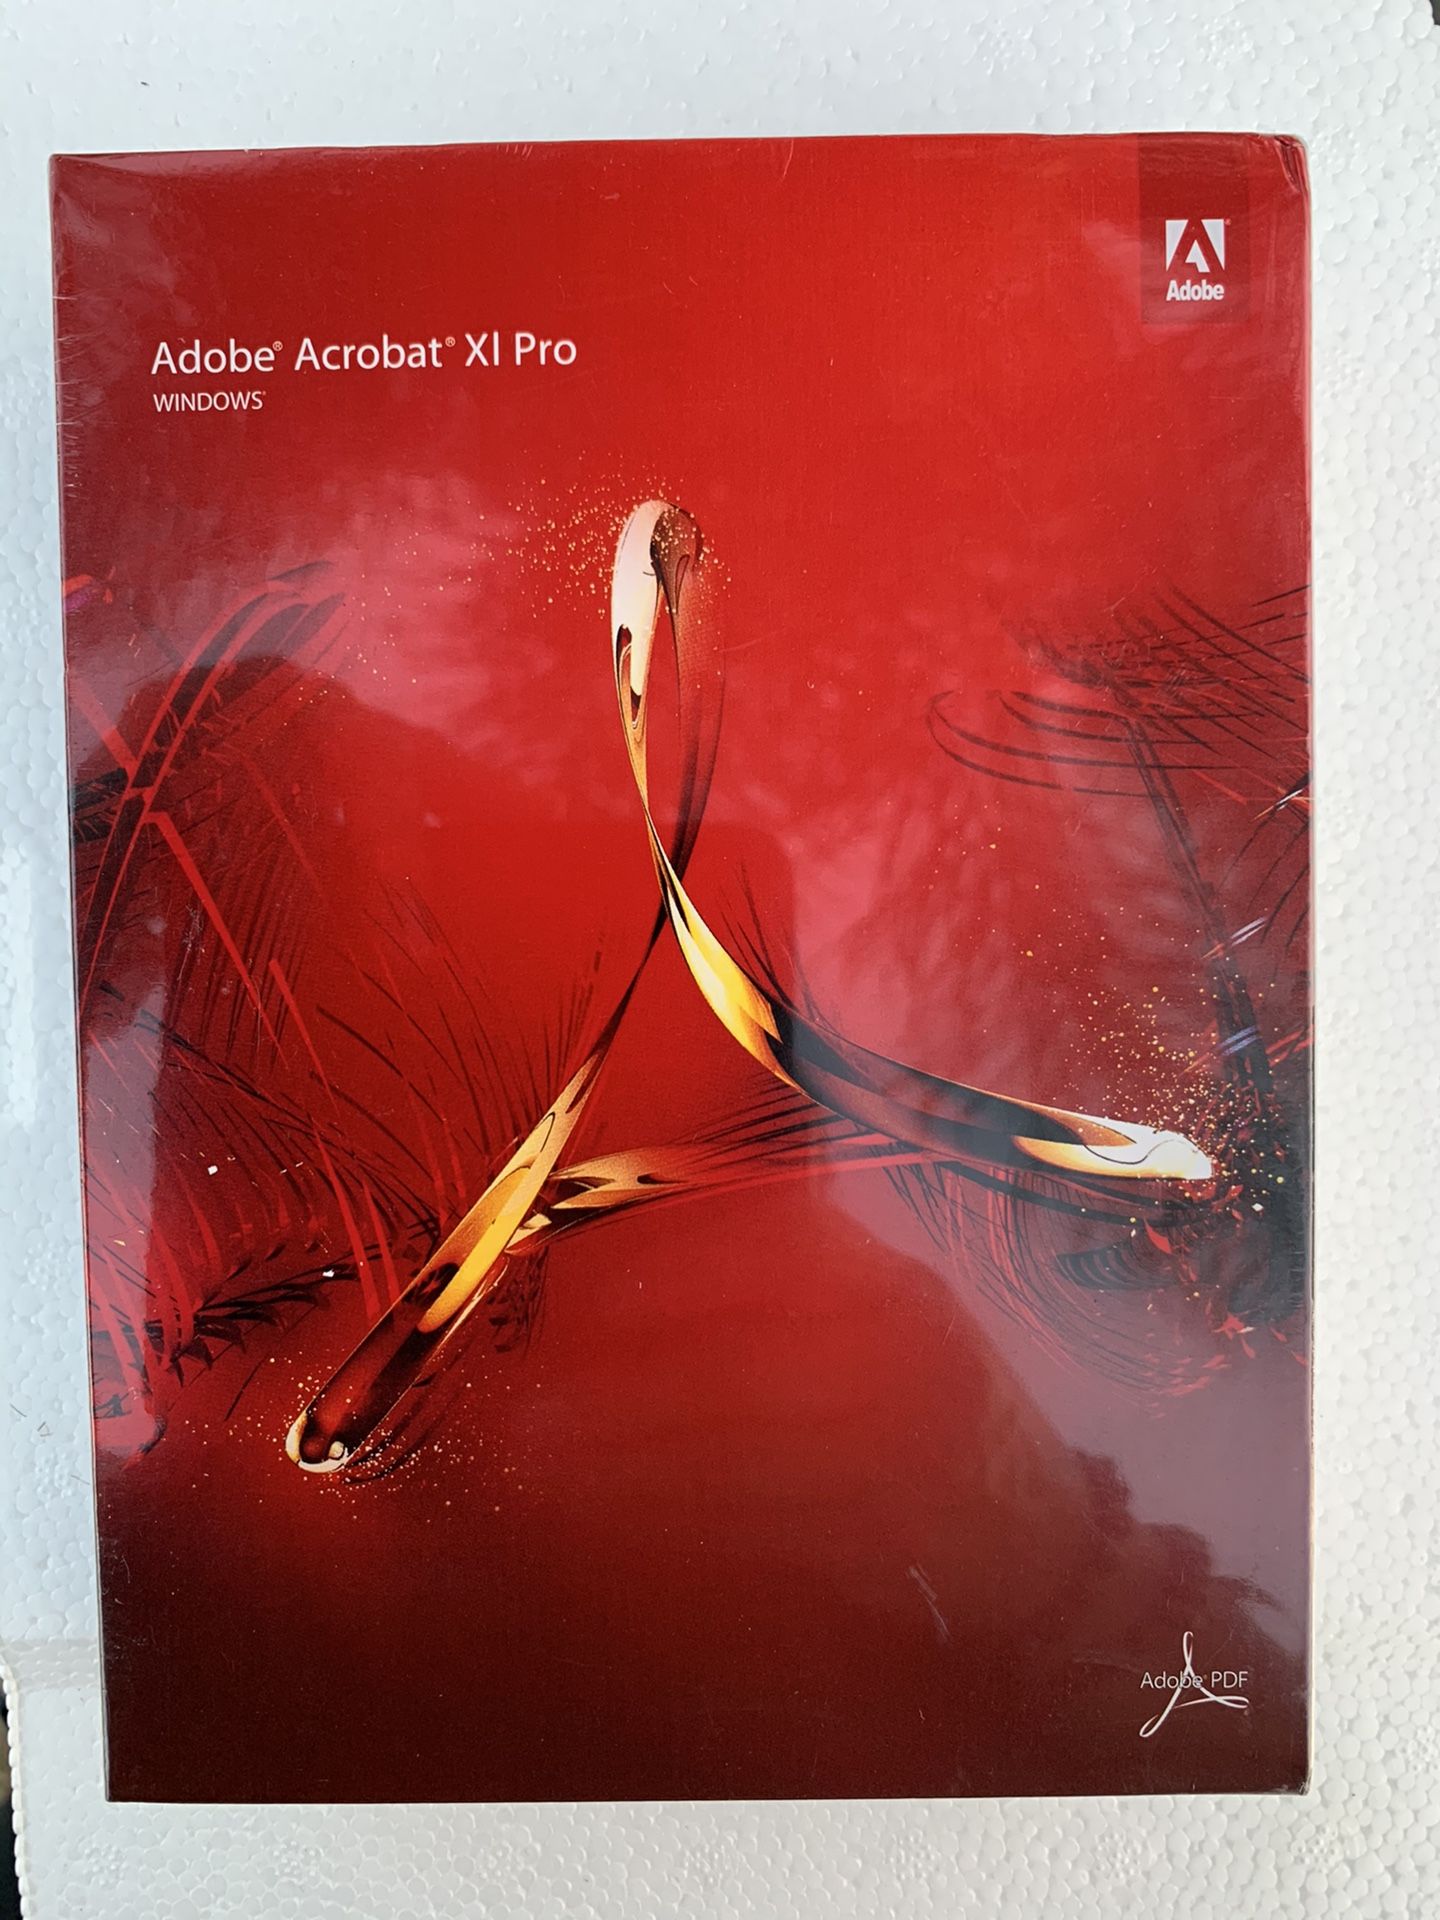 Adobe Acrobat XI Pro for windows new in sealed package